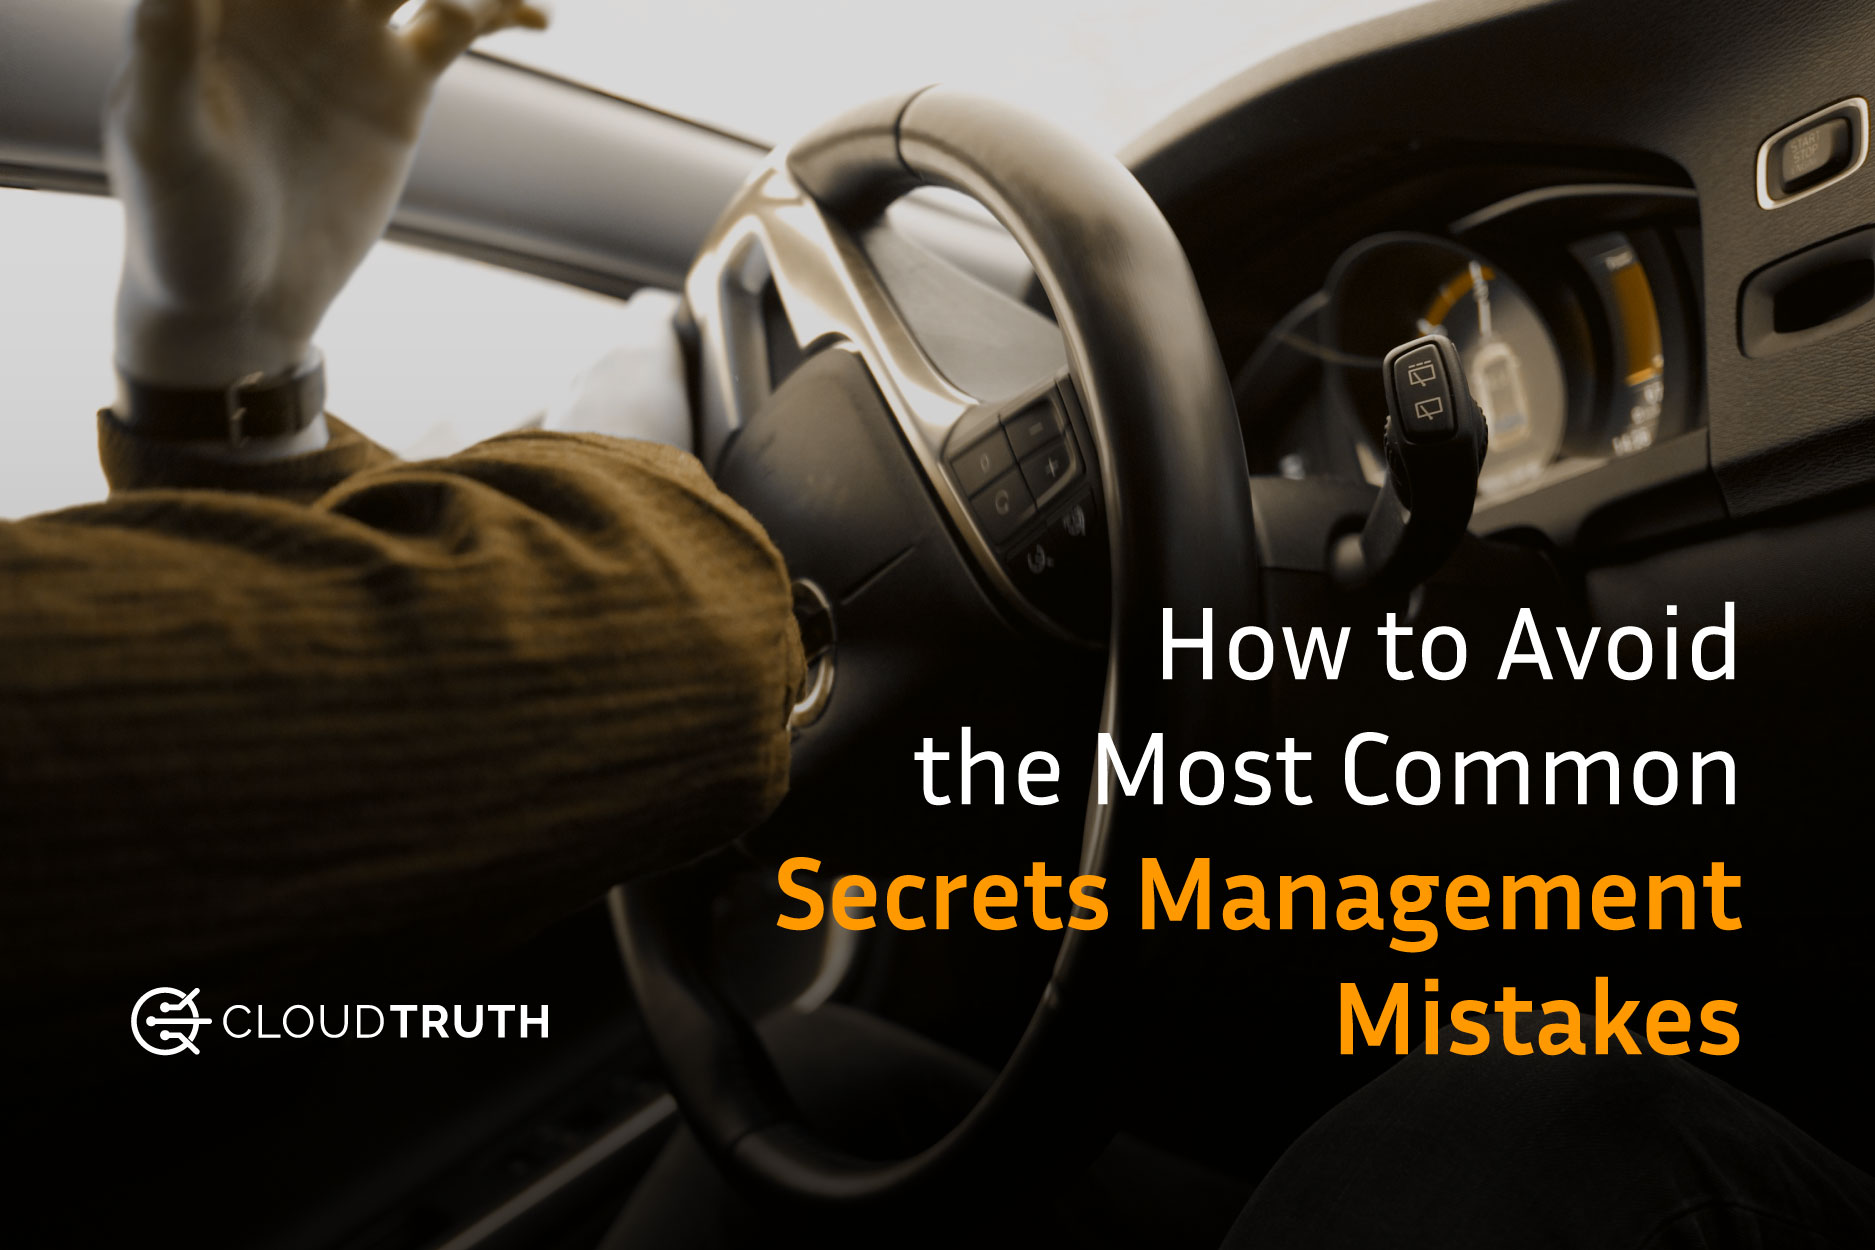 The Most Common Secrets Management Mistakes and How to Avoid Them